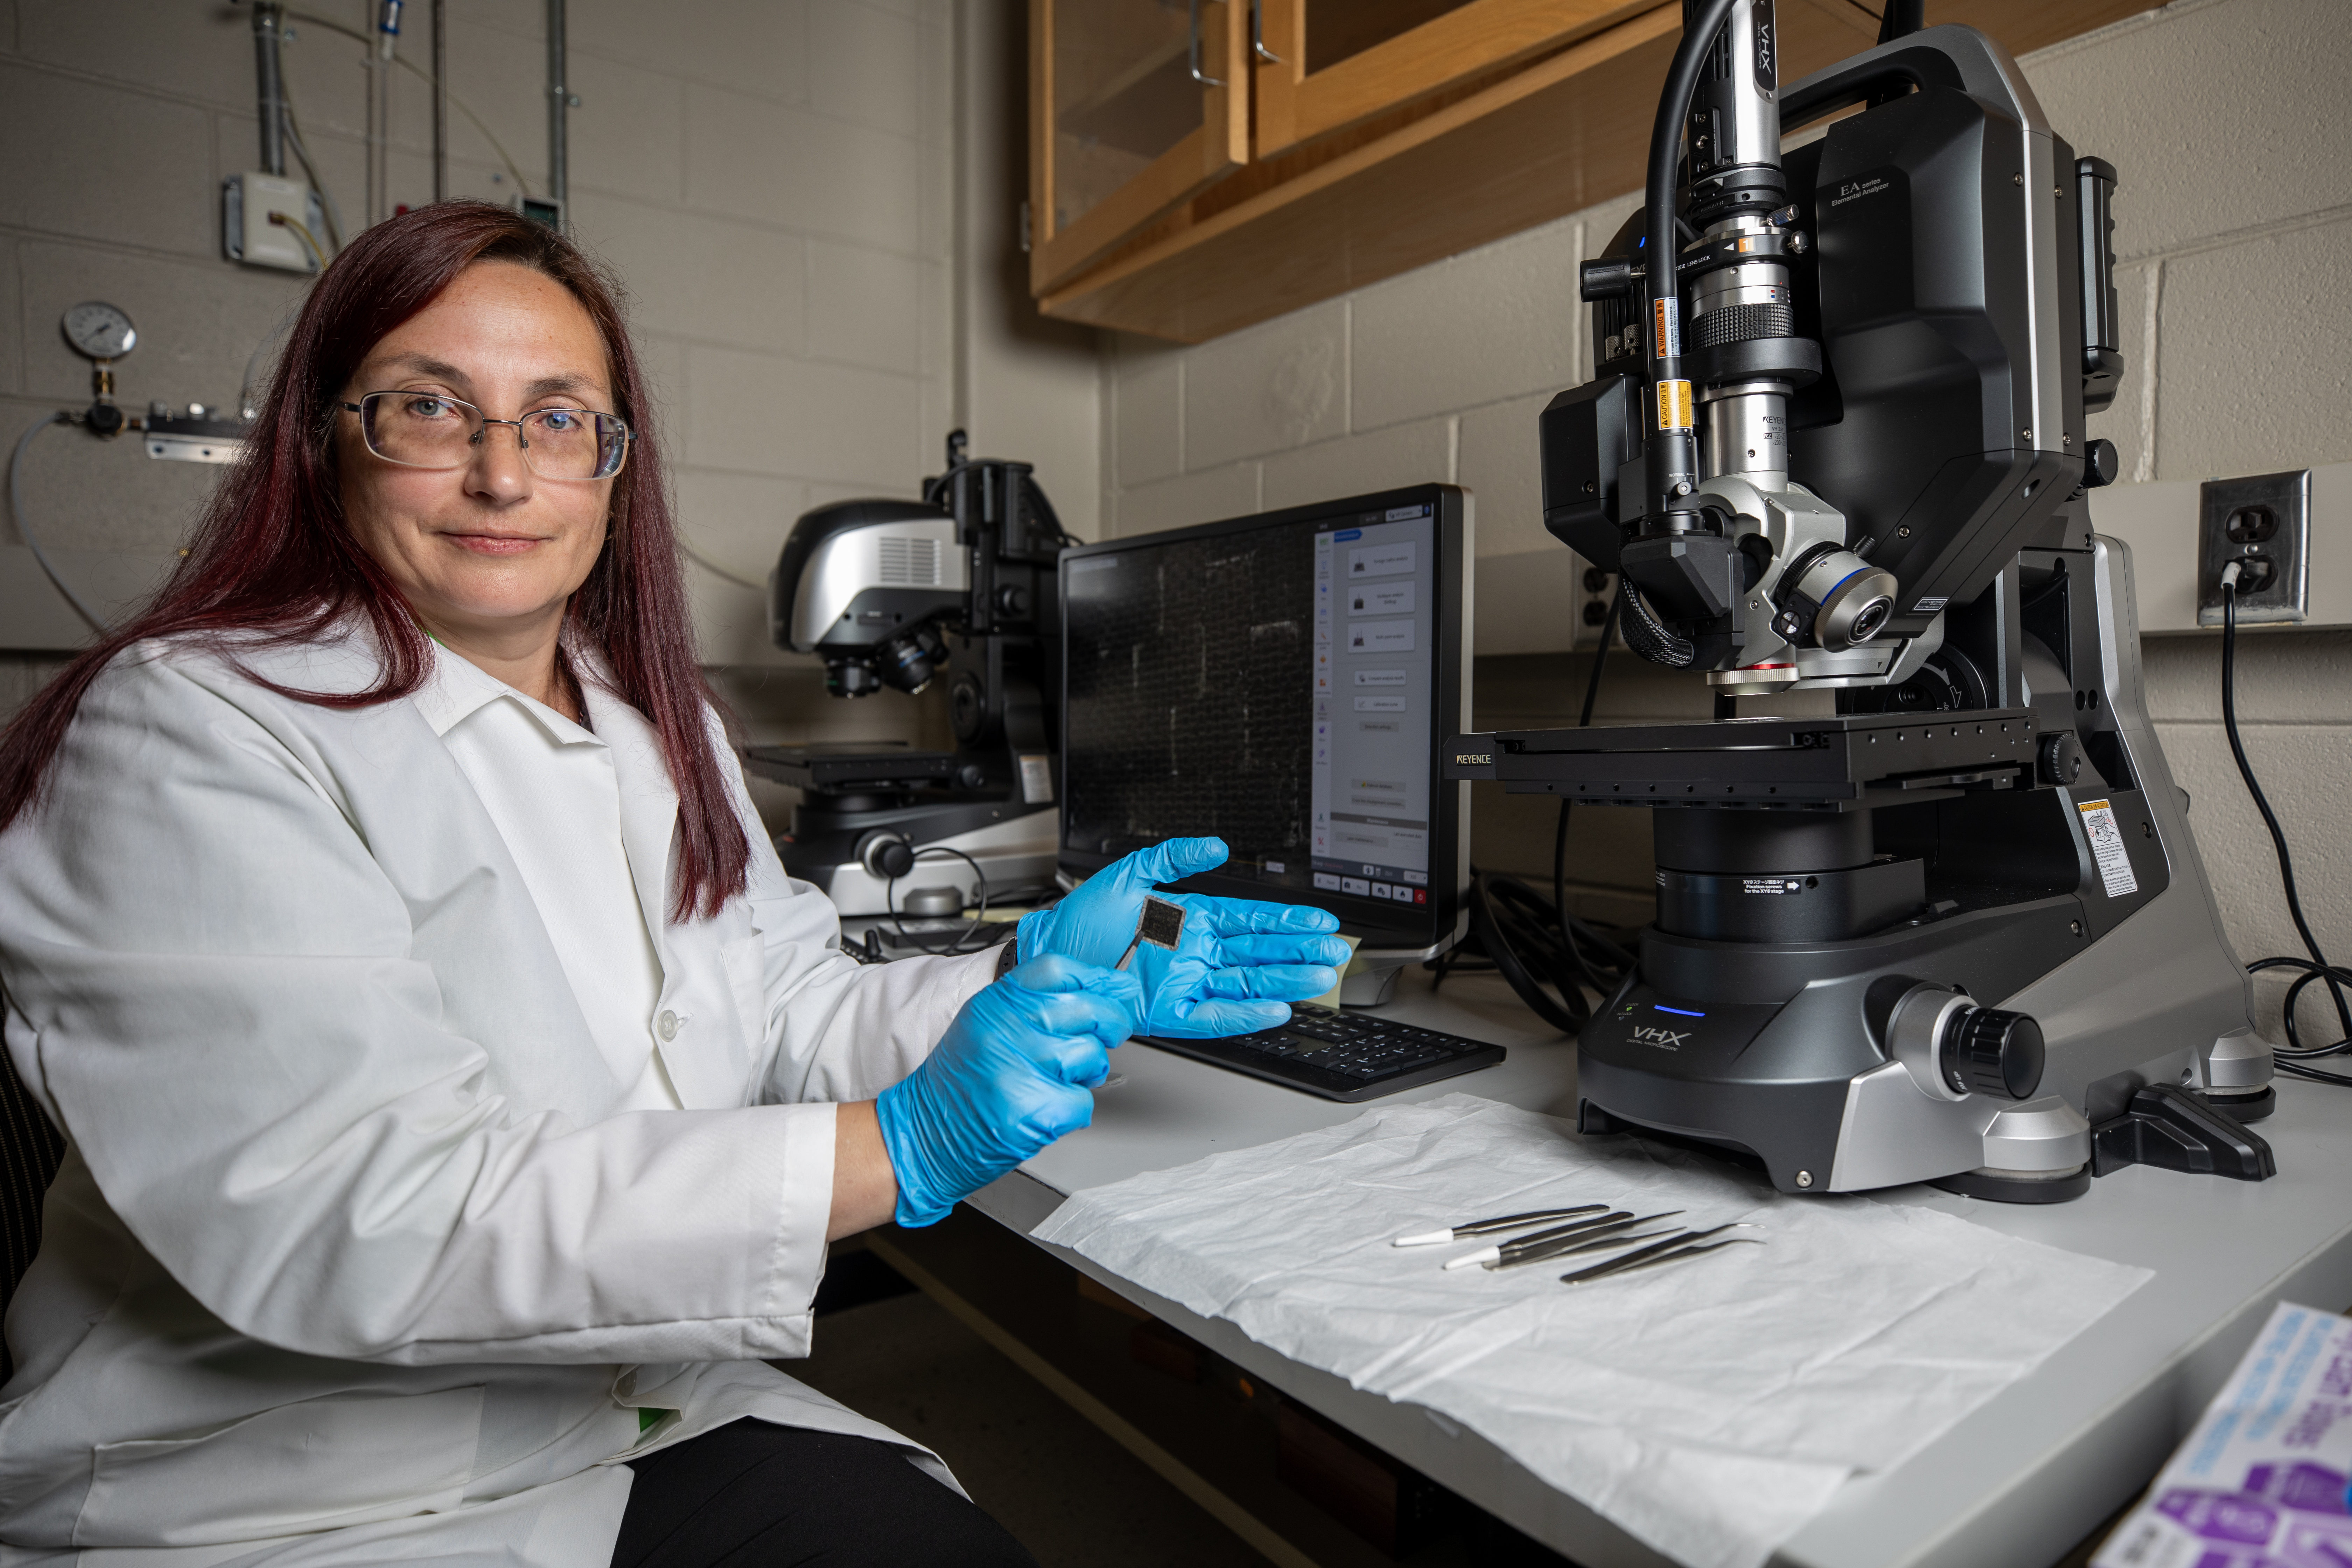 GTRI senior research engineer Elena Plis prepares to analyze a material sample that had been exposed to the space environment on the outside the International Space Station